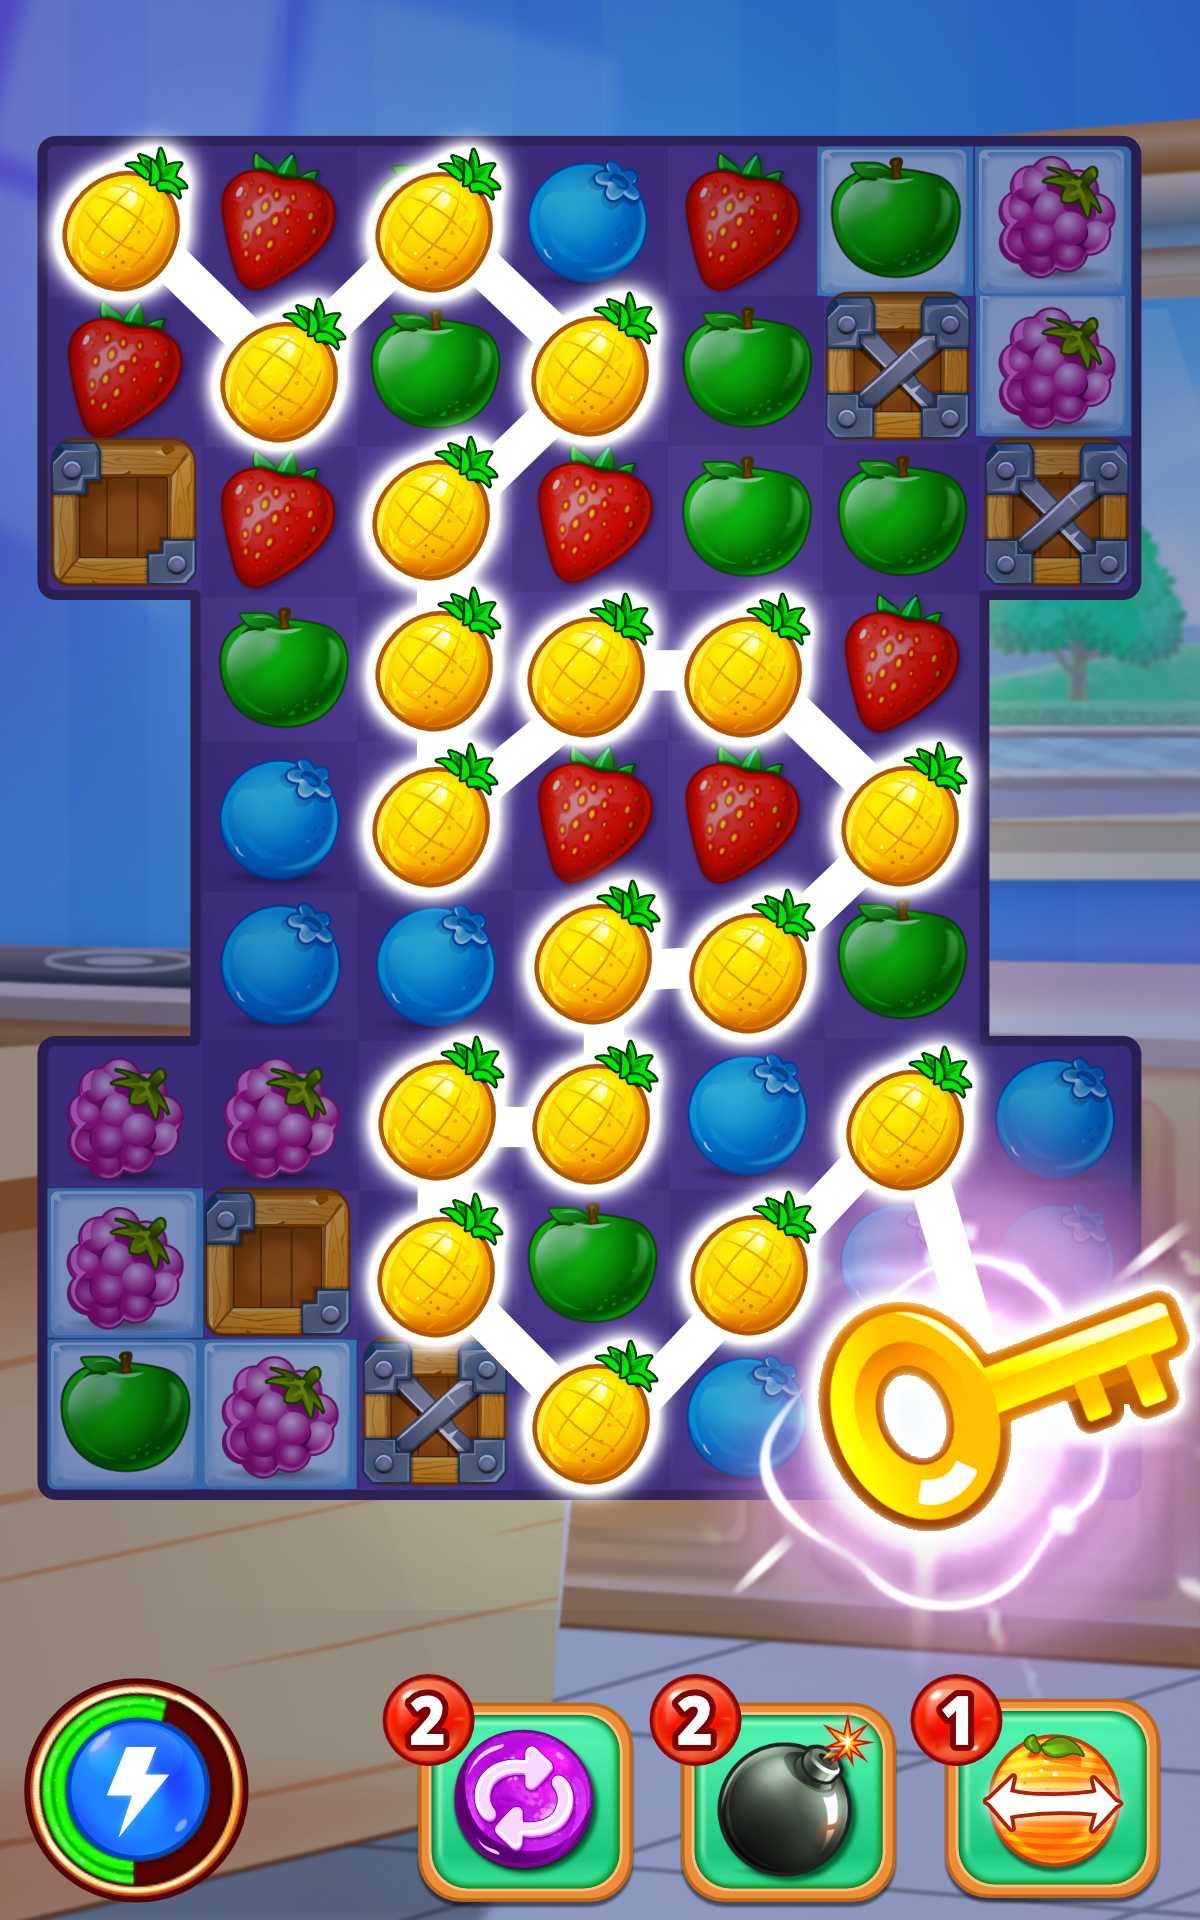 instal the new version for android Balloon Paradise - Match 3 Puzzle Game